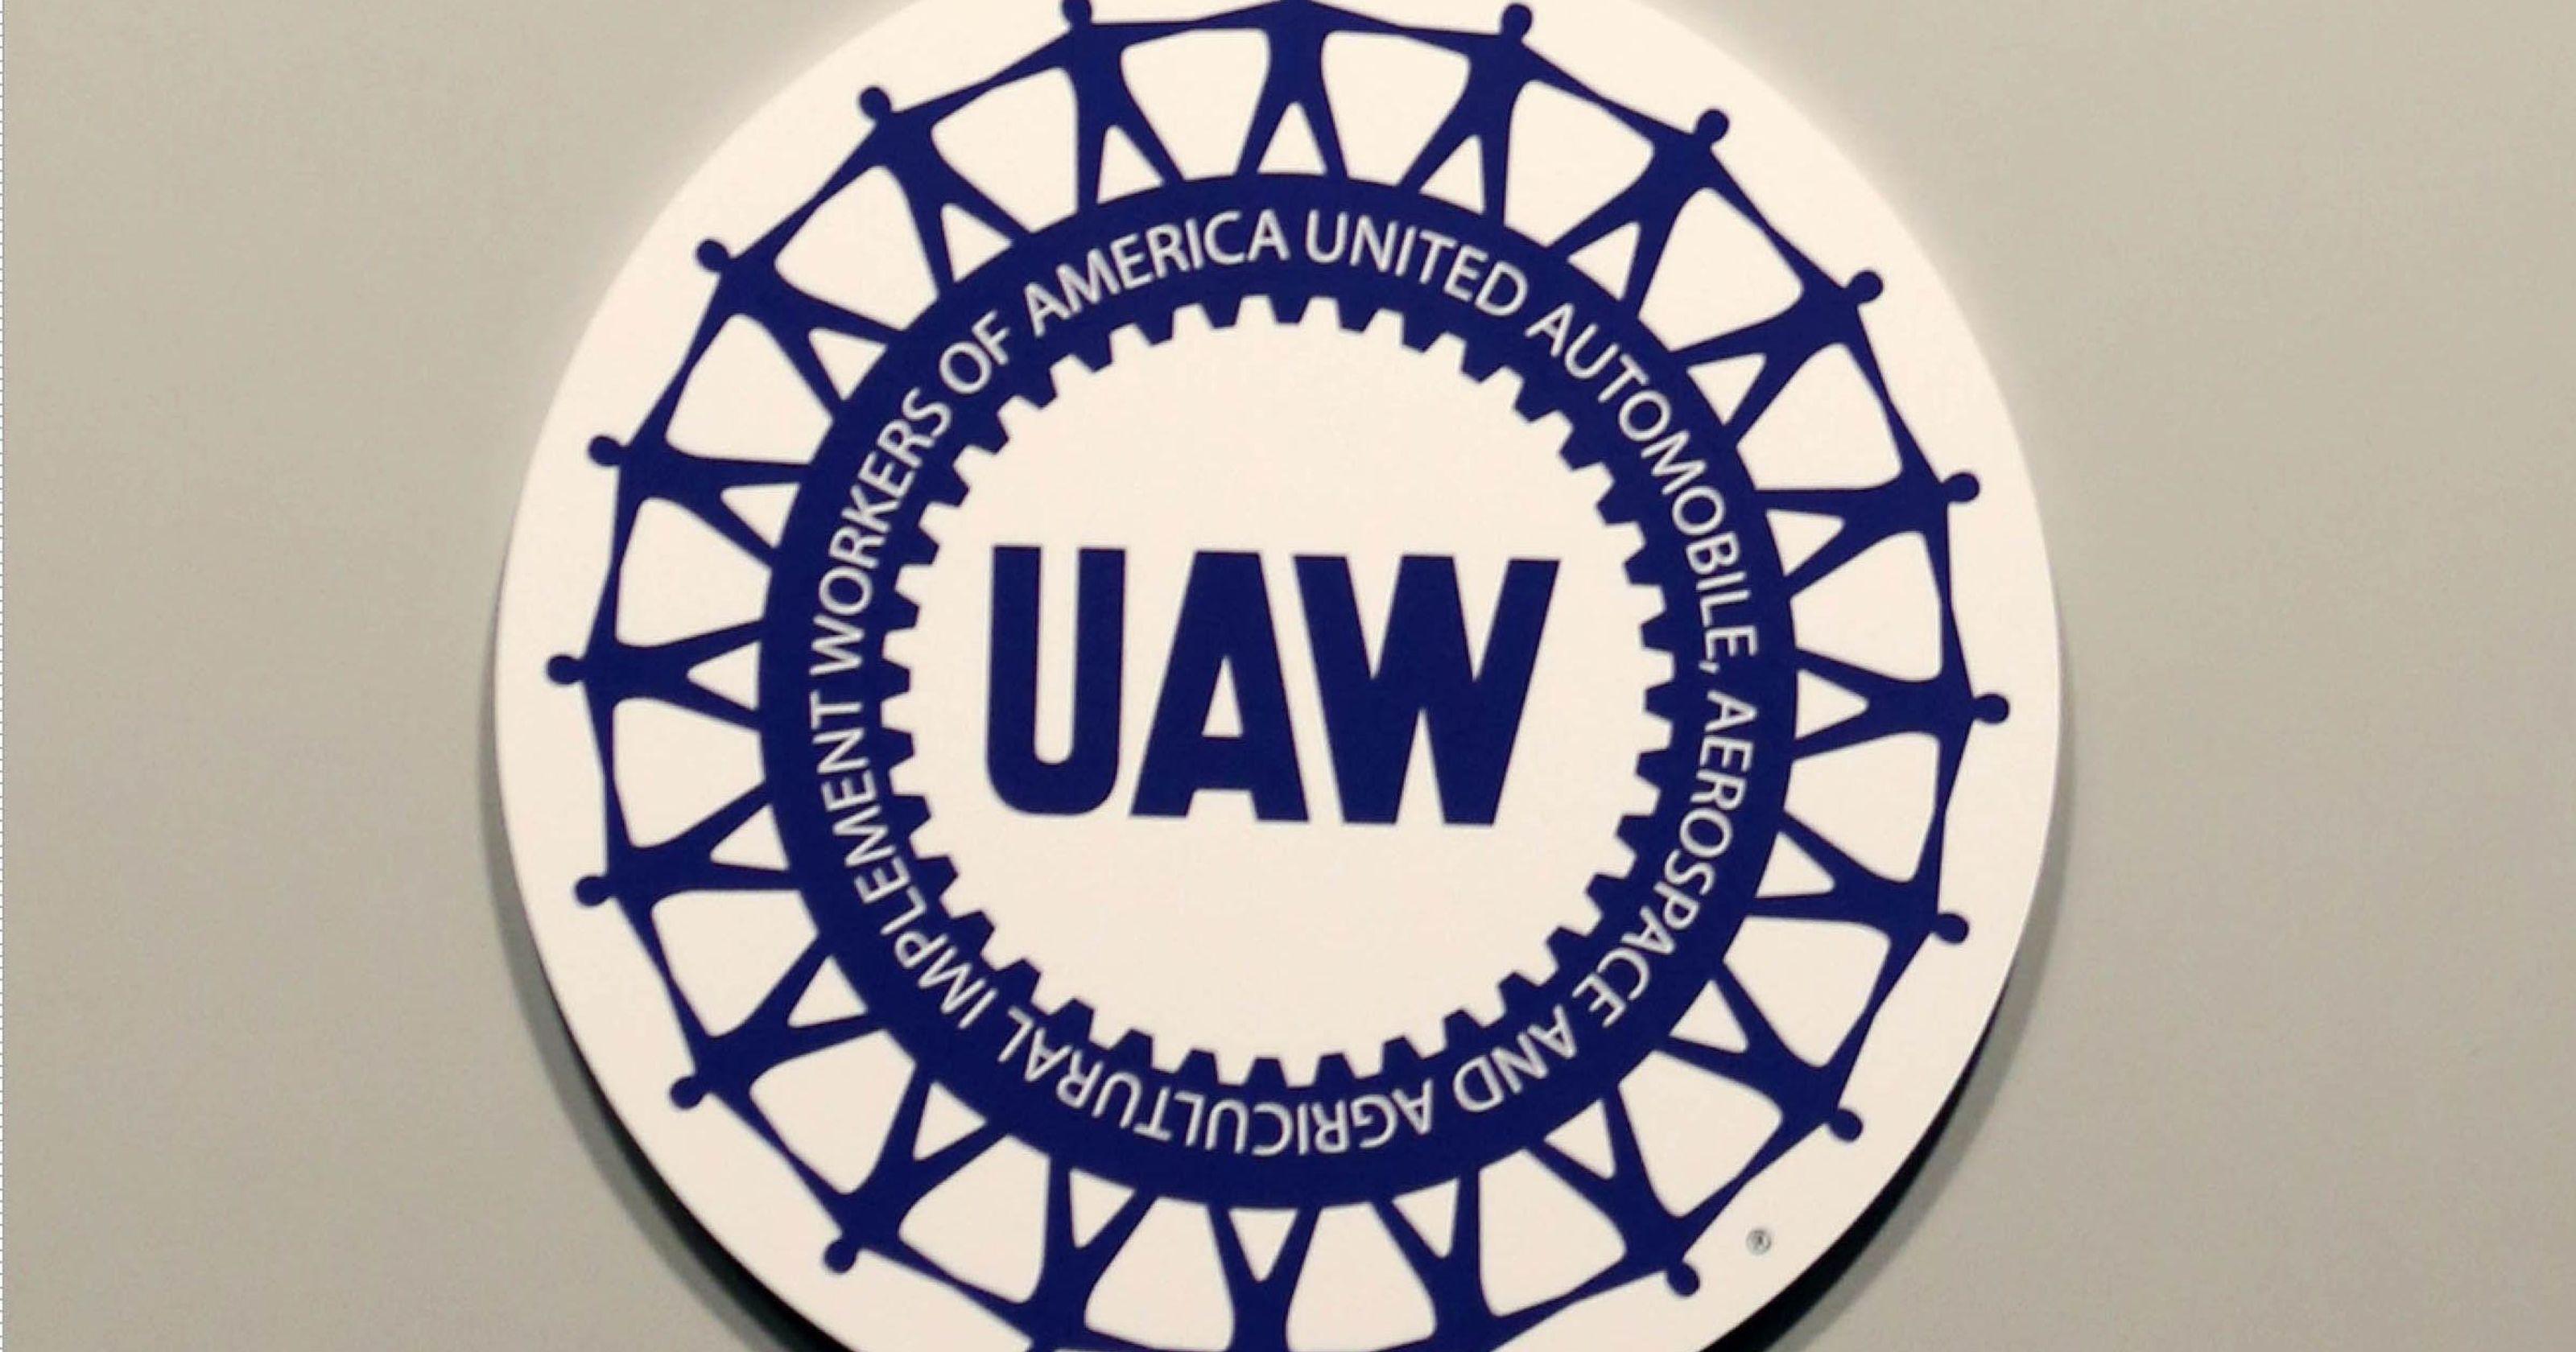 Racial Logo - UAW group: Racial incidents on the rise and need to be stopped